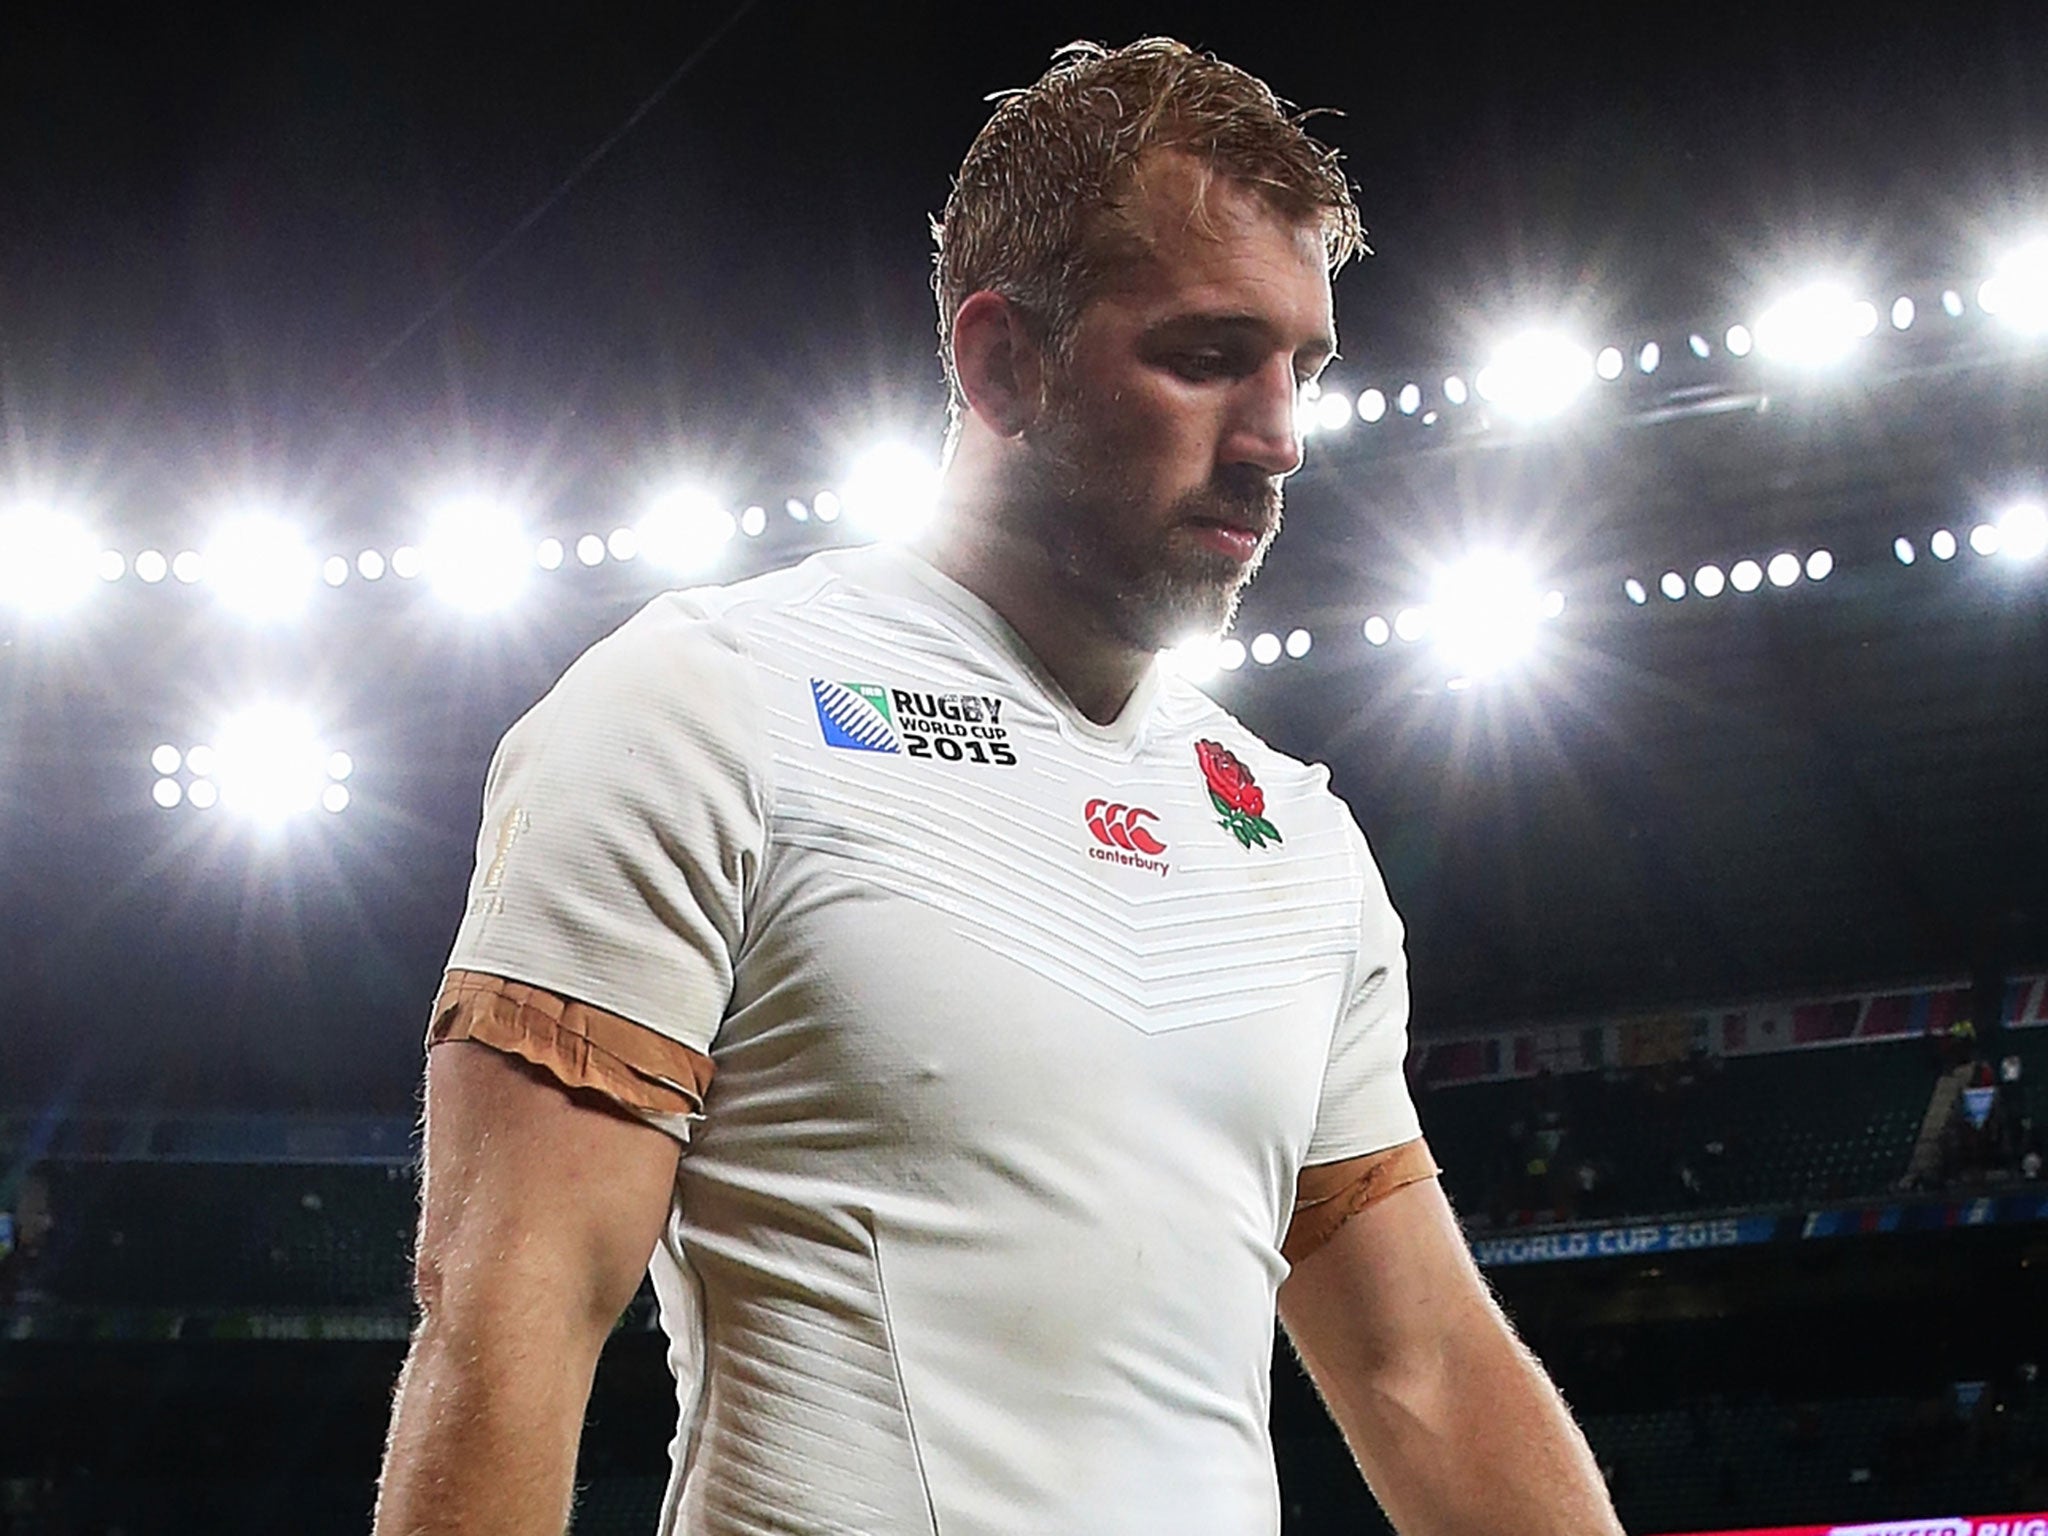 A dejected Chris Robshaw walks off the Twickenham pitch after the defeat to Wales